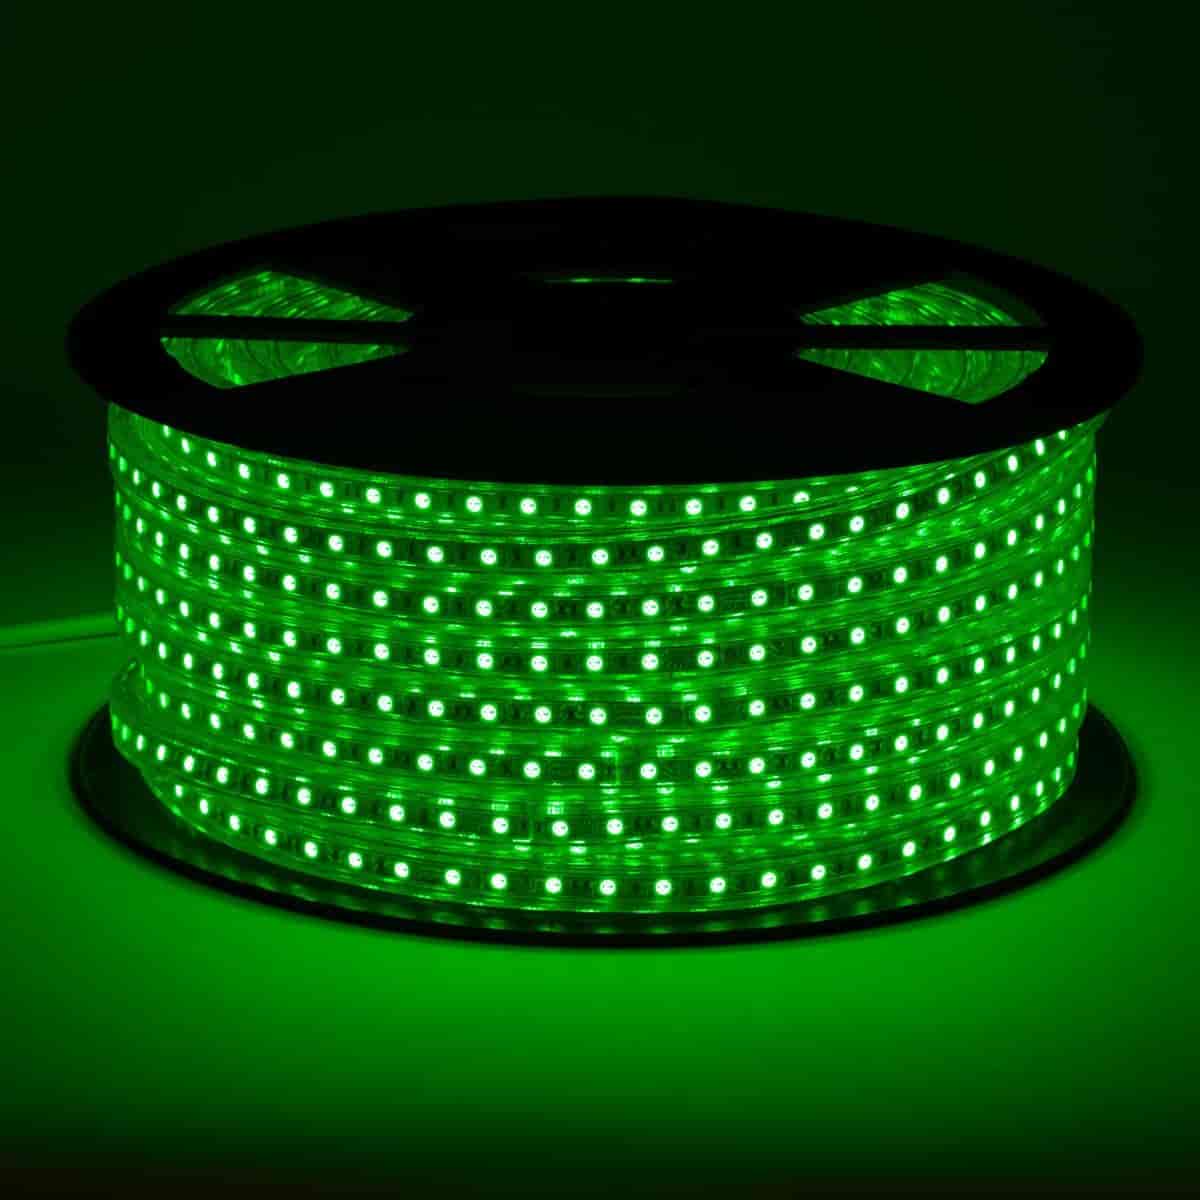 illuminated green led strip light reel with visible chips